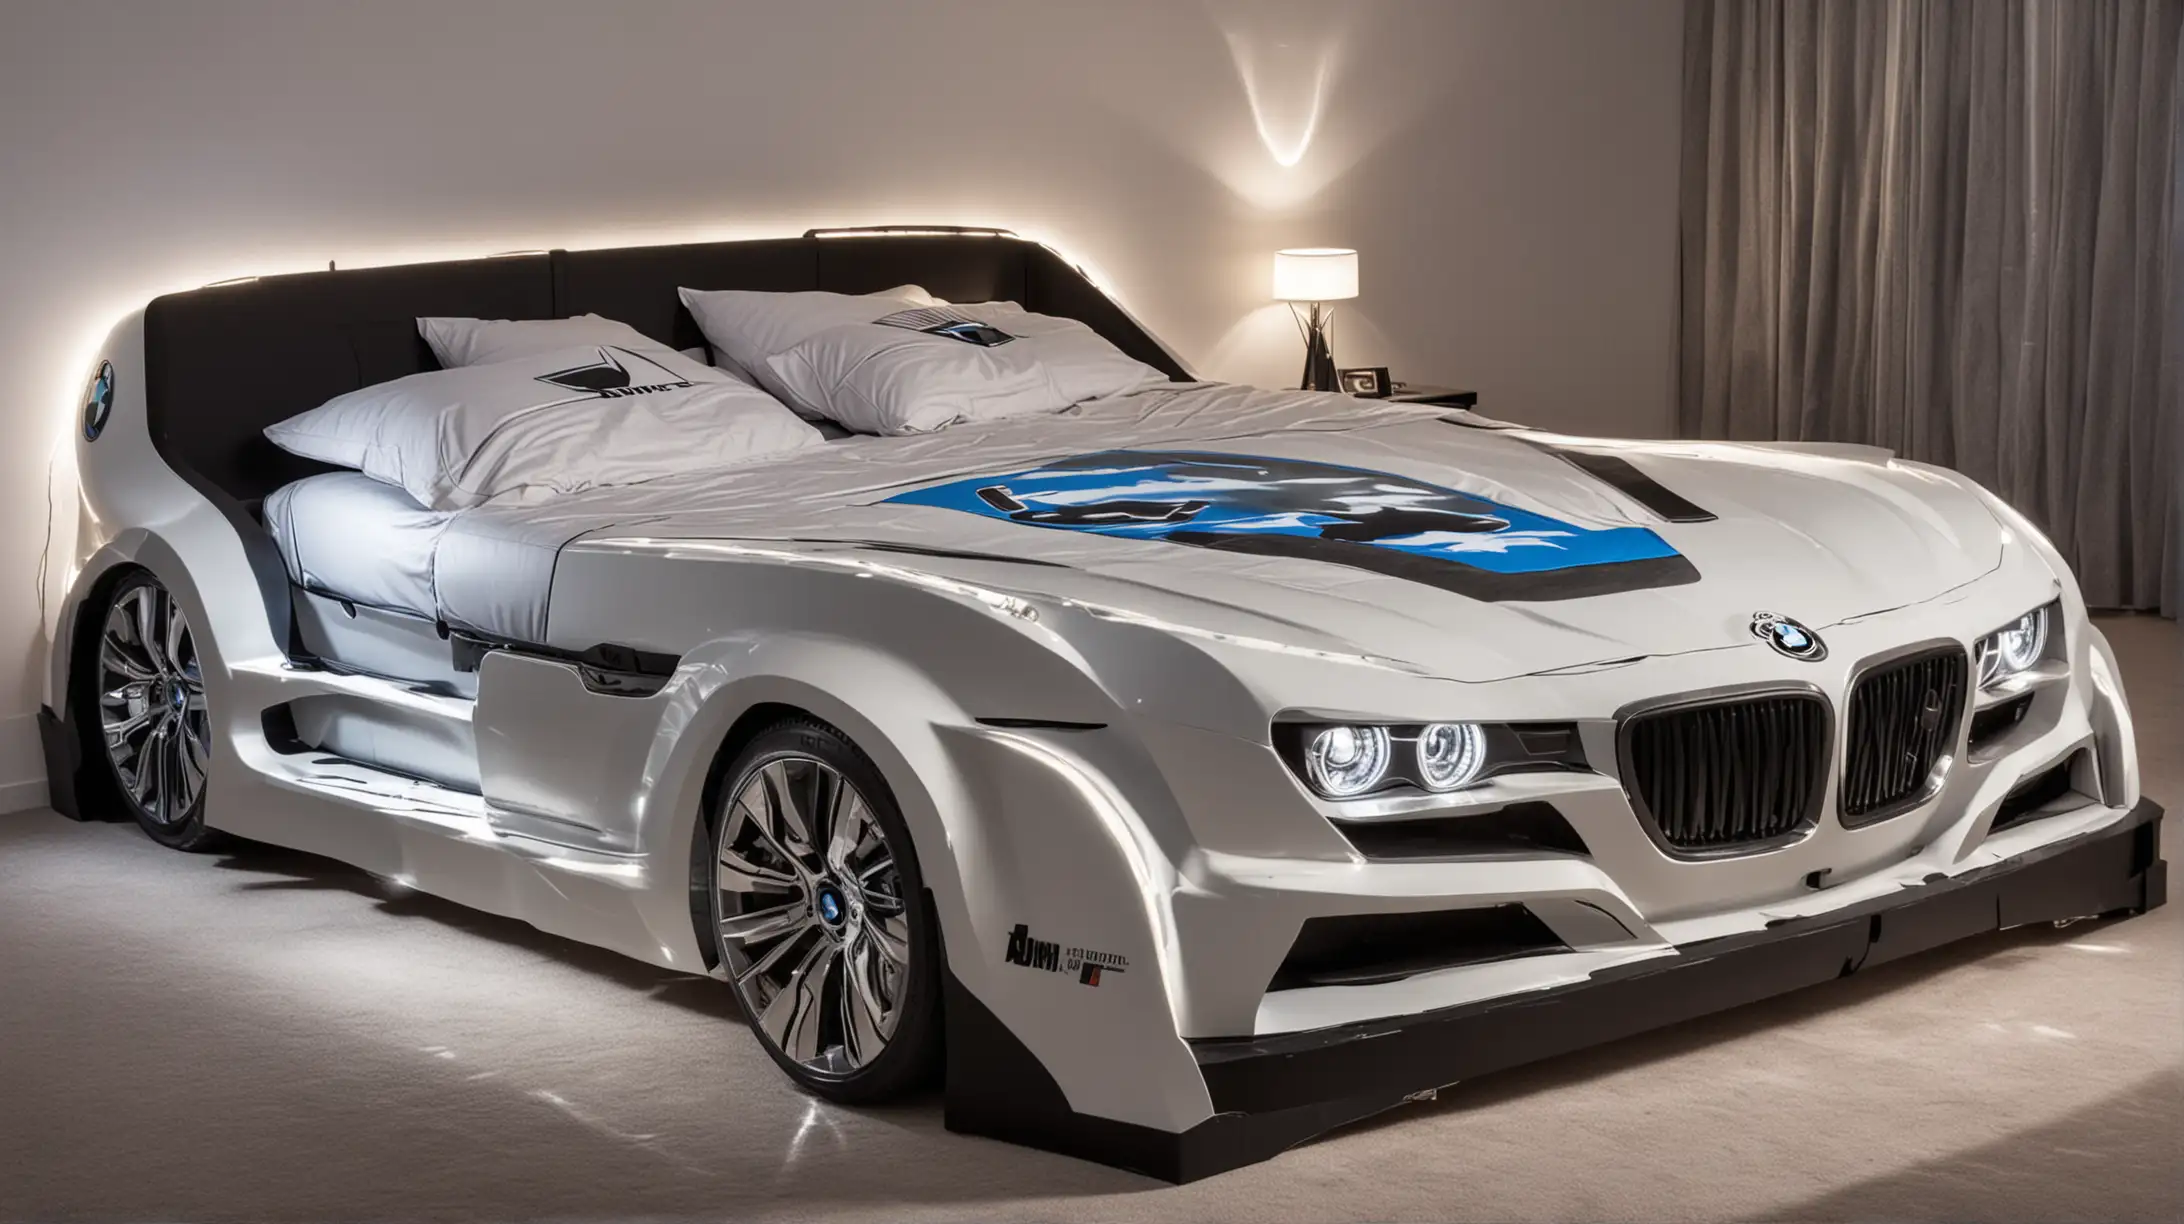 Luxury BMW Car Double Bed with Headlights and Lightning Graphics